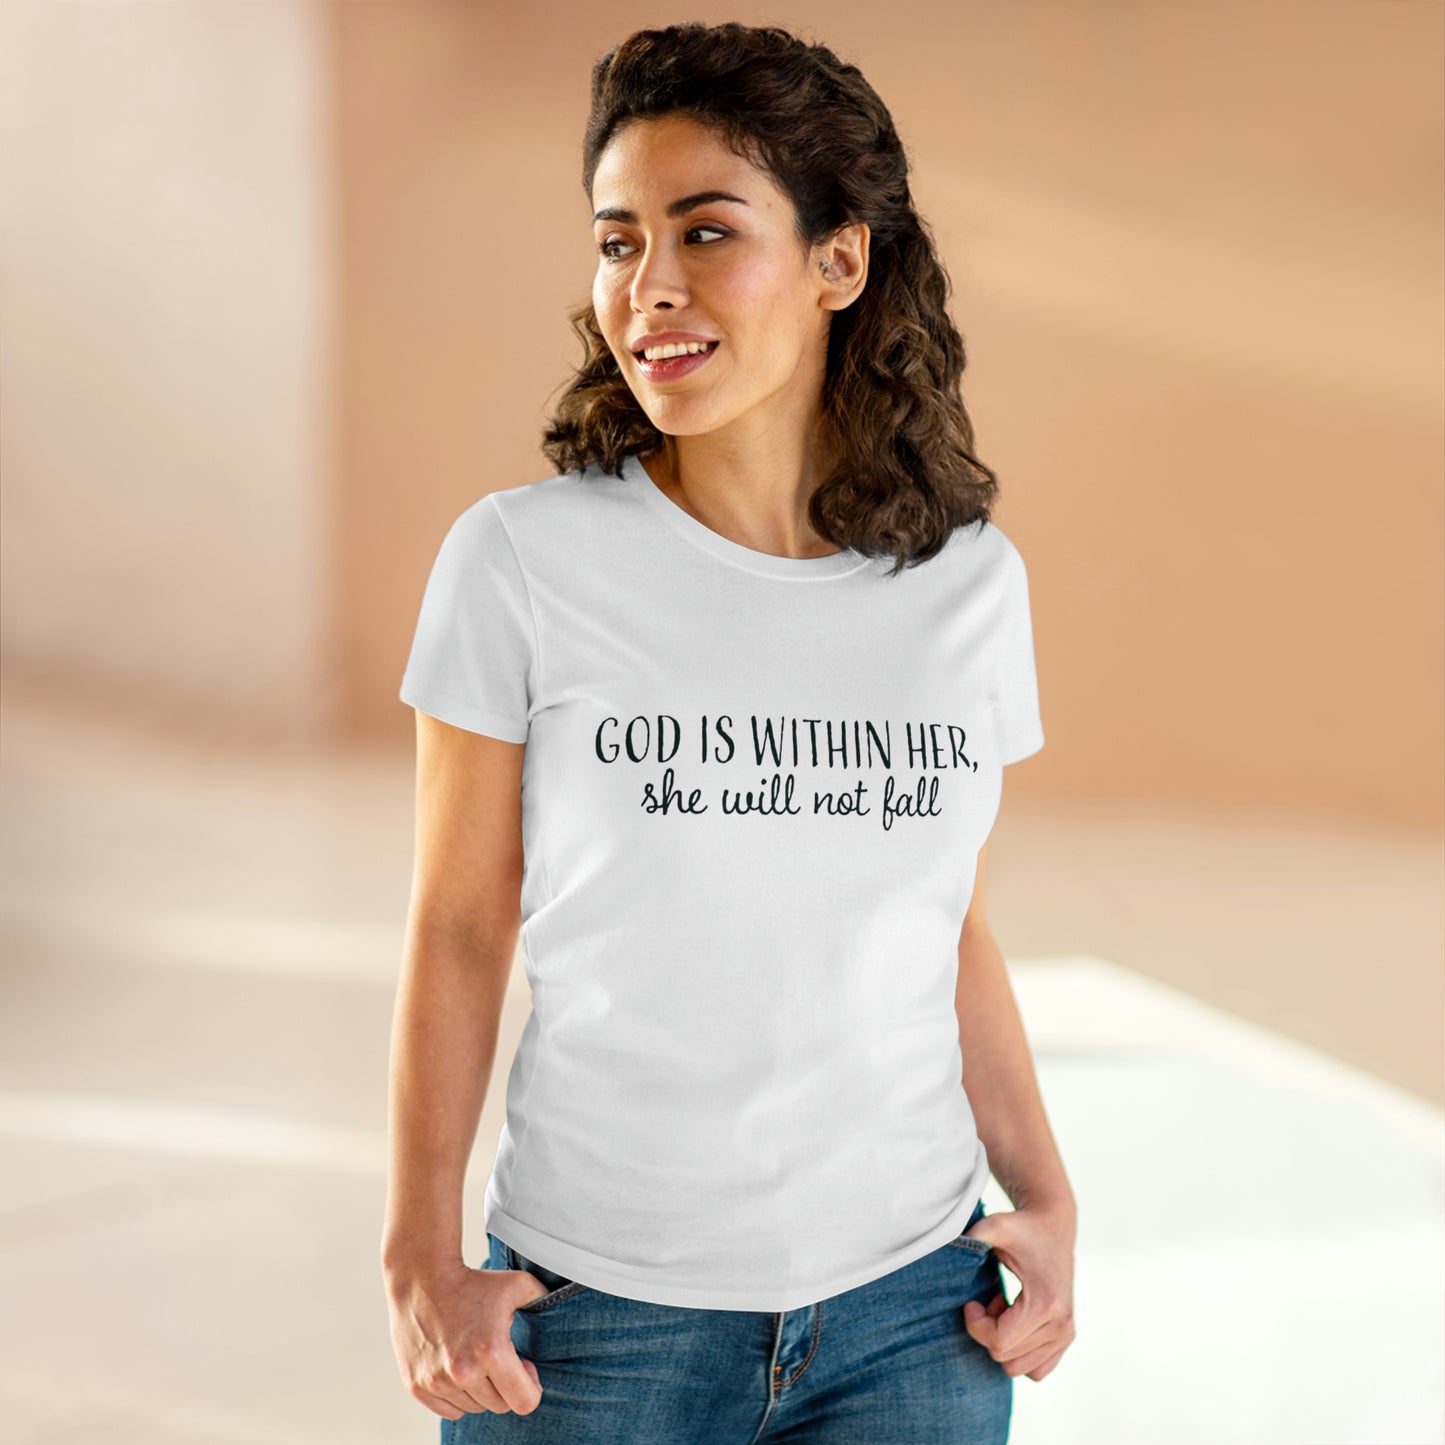 Ladies Bible Verse Shirt, Relaxed Fit Short Sleeve T-Shirt, Ladies Crewneck, Woman's Cotton Tee